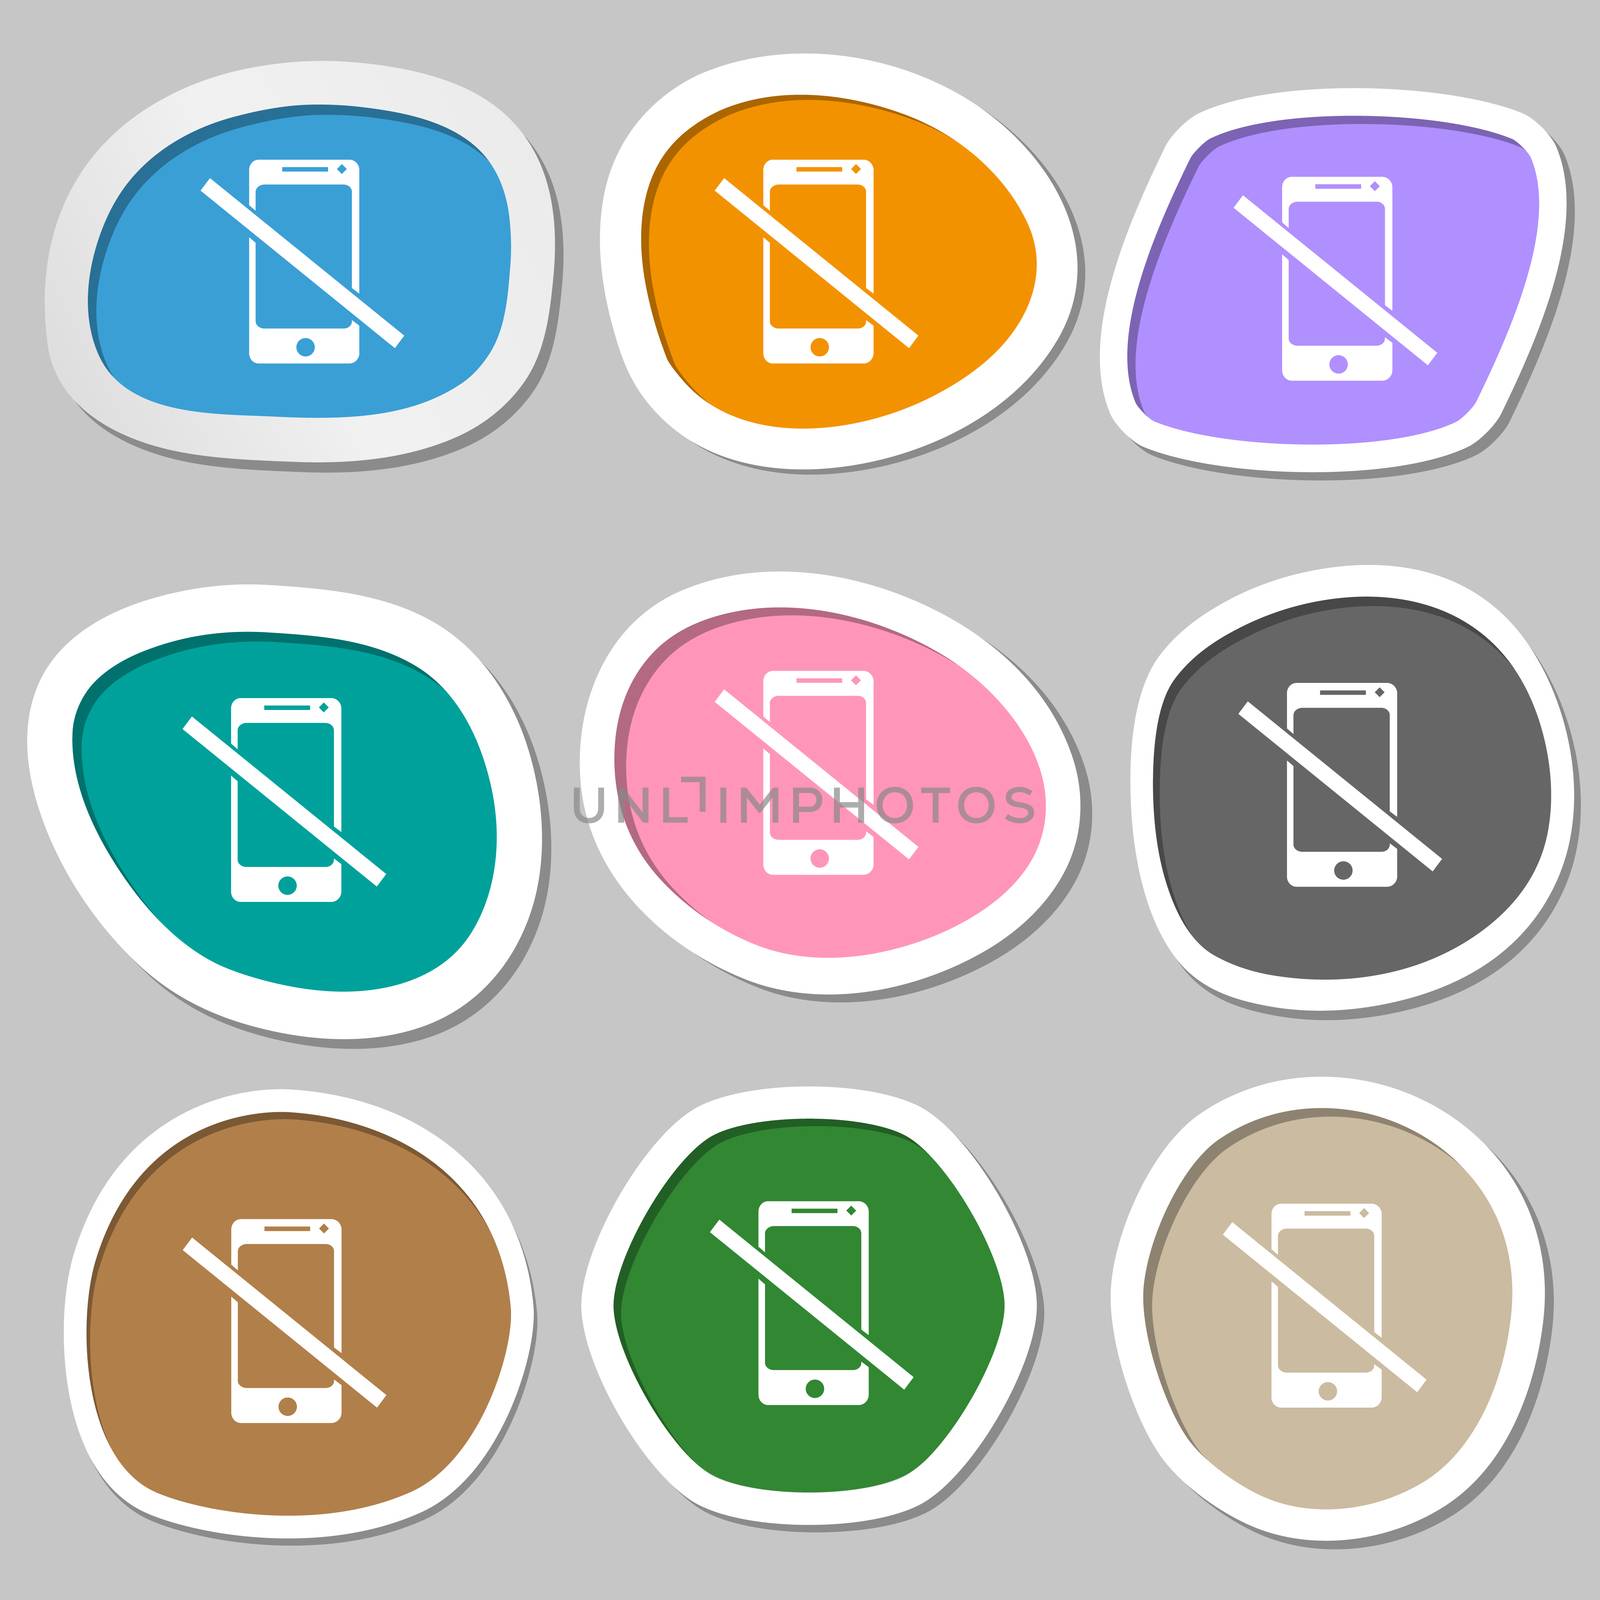 Do not call. Smartphone signs icon. Support symbol. Multicolored paper stickers. illustration